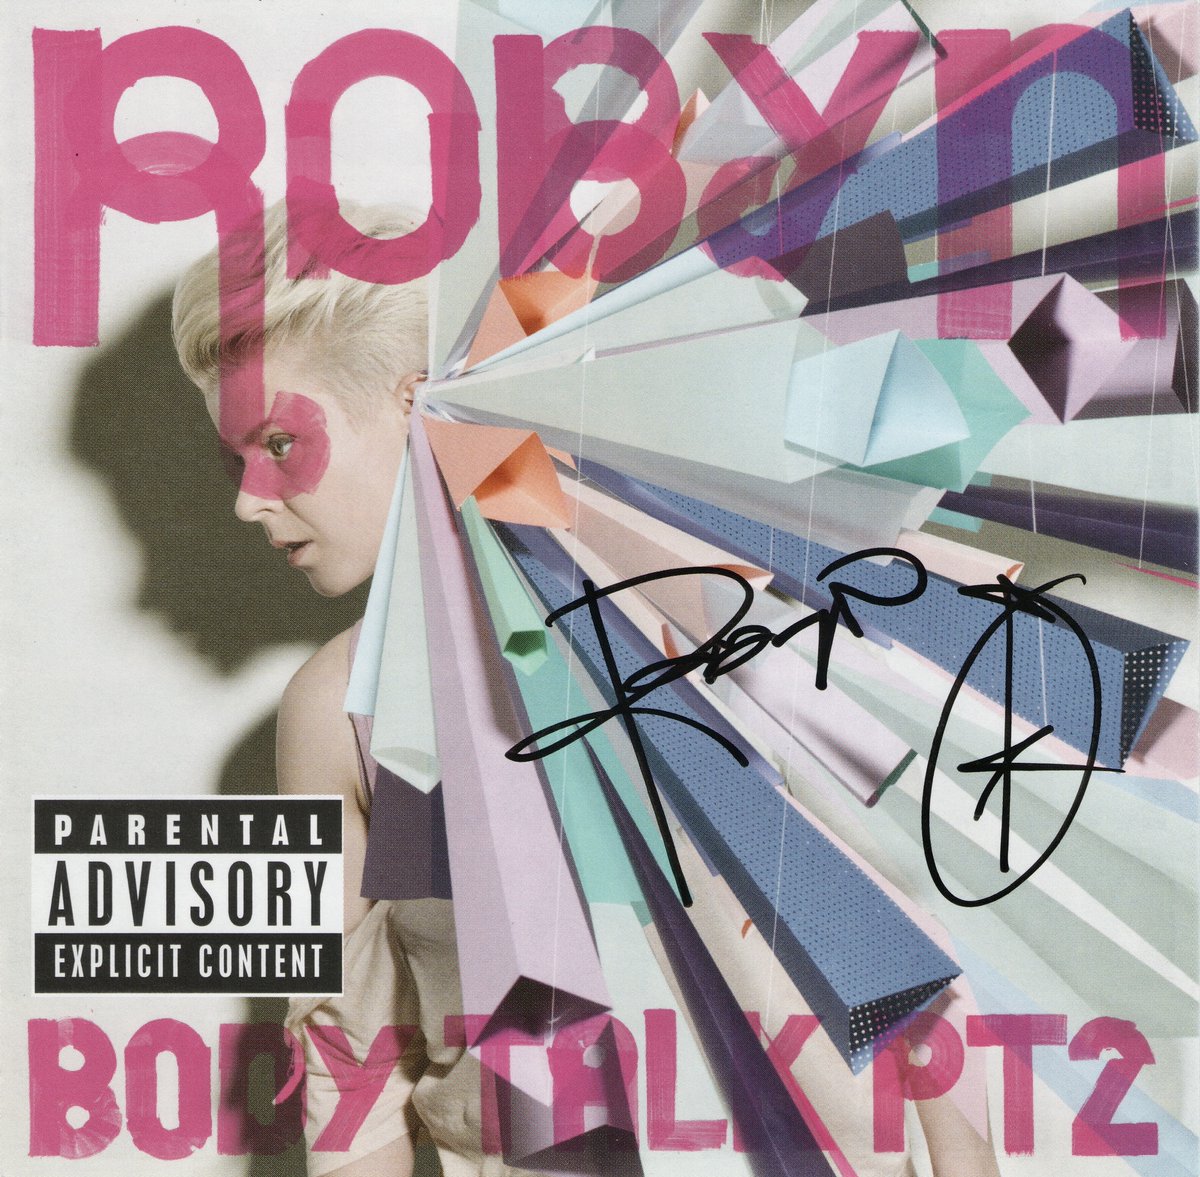 Happy Birthday to Swedish pop icon @robynkonichiwa! 🎂
#BodyTalkPt2 mini-album, with booklet autographed by Robyn for @newburycomics, is from our collection.
#RobynIsHere #MyTruth #DontStopTheMusic #Robyn #BodyTalkPt1 #BodyTalkPt3 #BodyTalk #DoItAgain #LoveIsFree #TrustMe #Honey